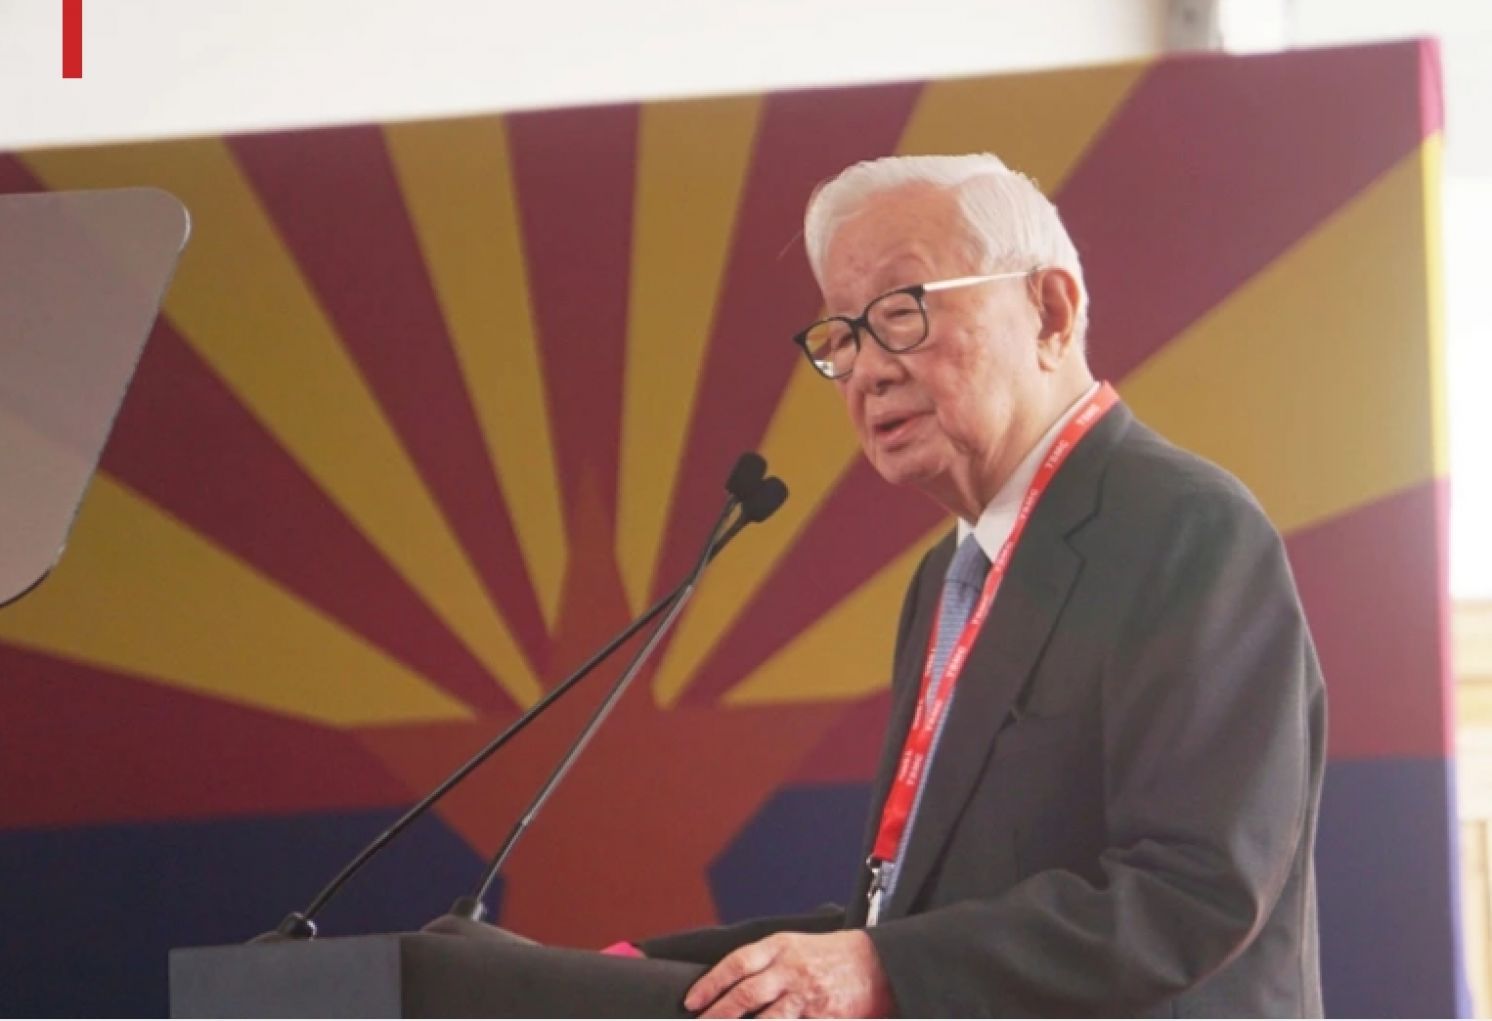 Blessing and "Curse" in Morris Chang's Remarks at Arizona Plant Tool-in Ceremony